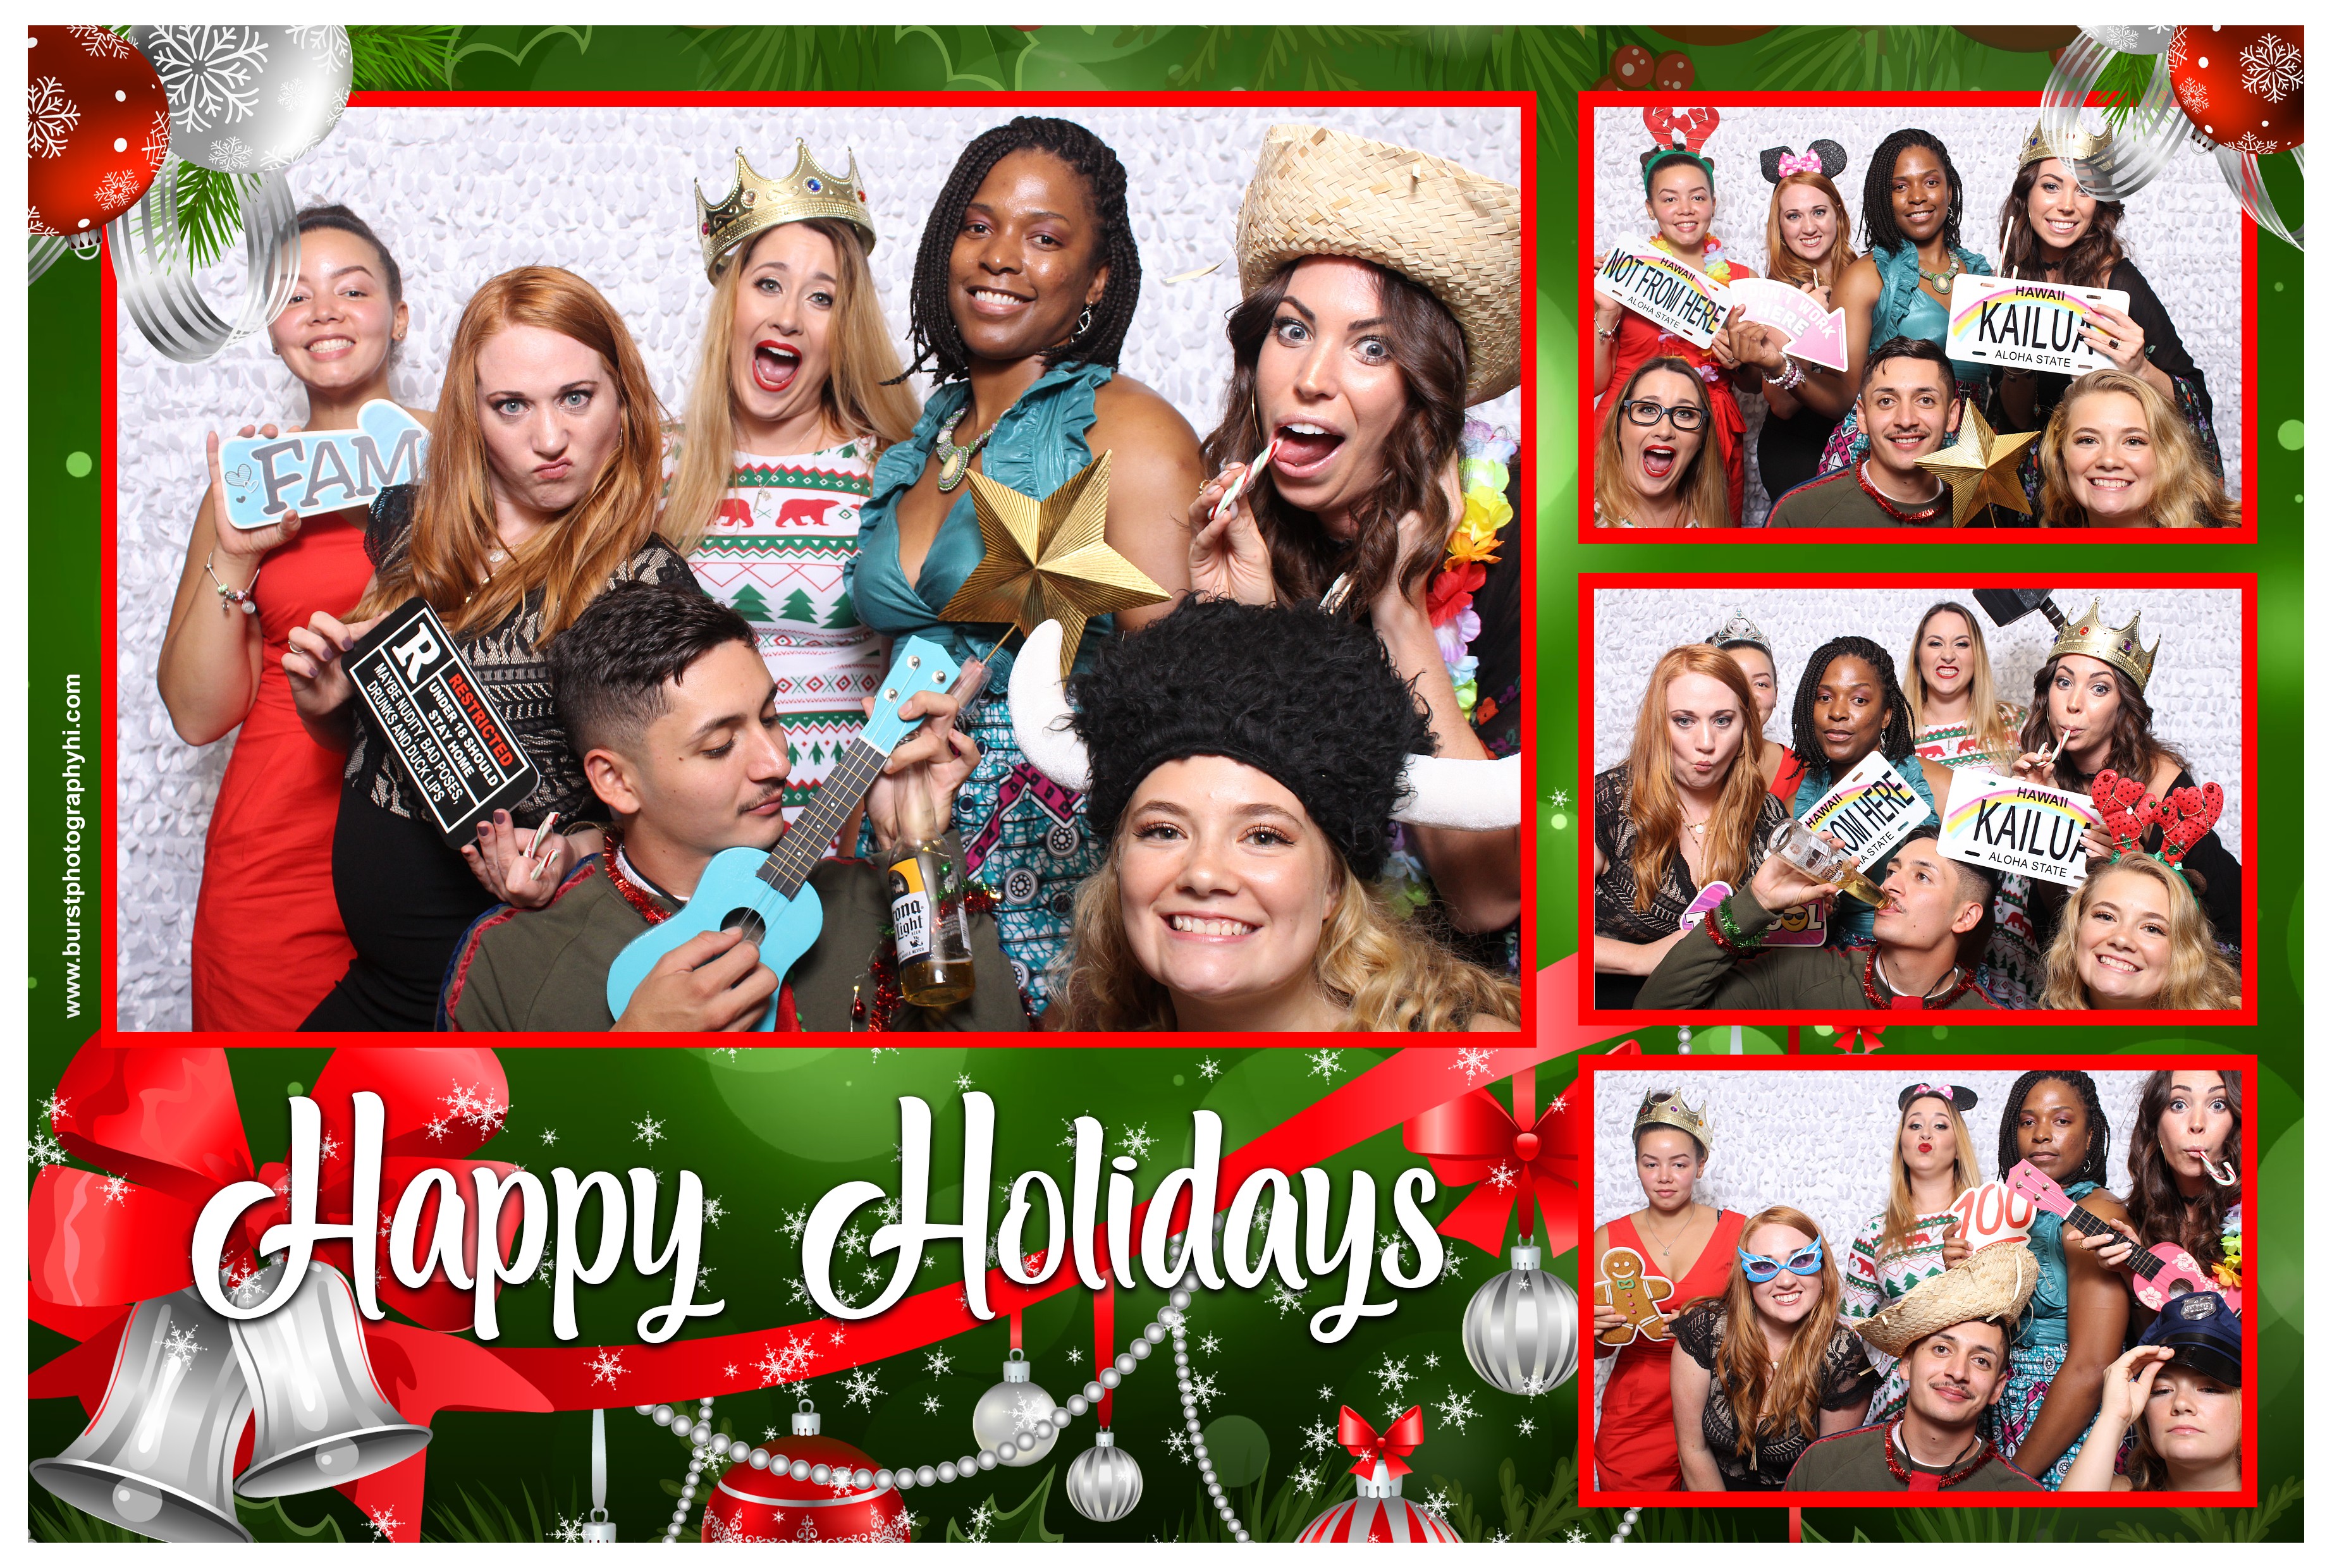 21st Dental Company Holiday Party – Burst Photography and Design